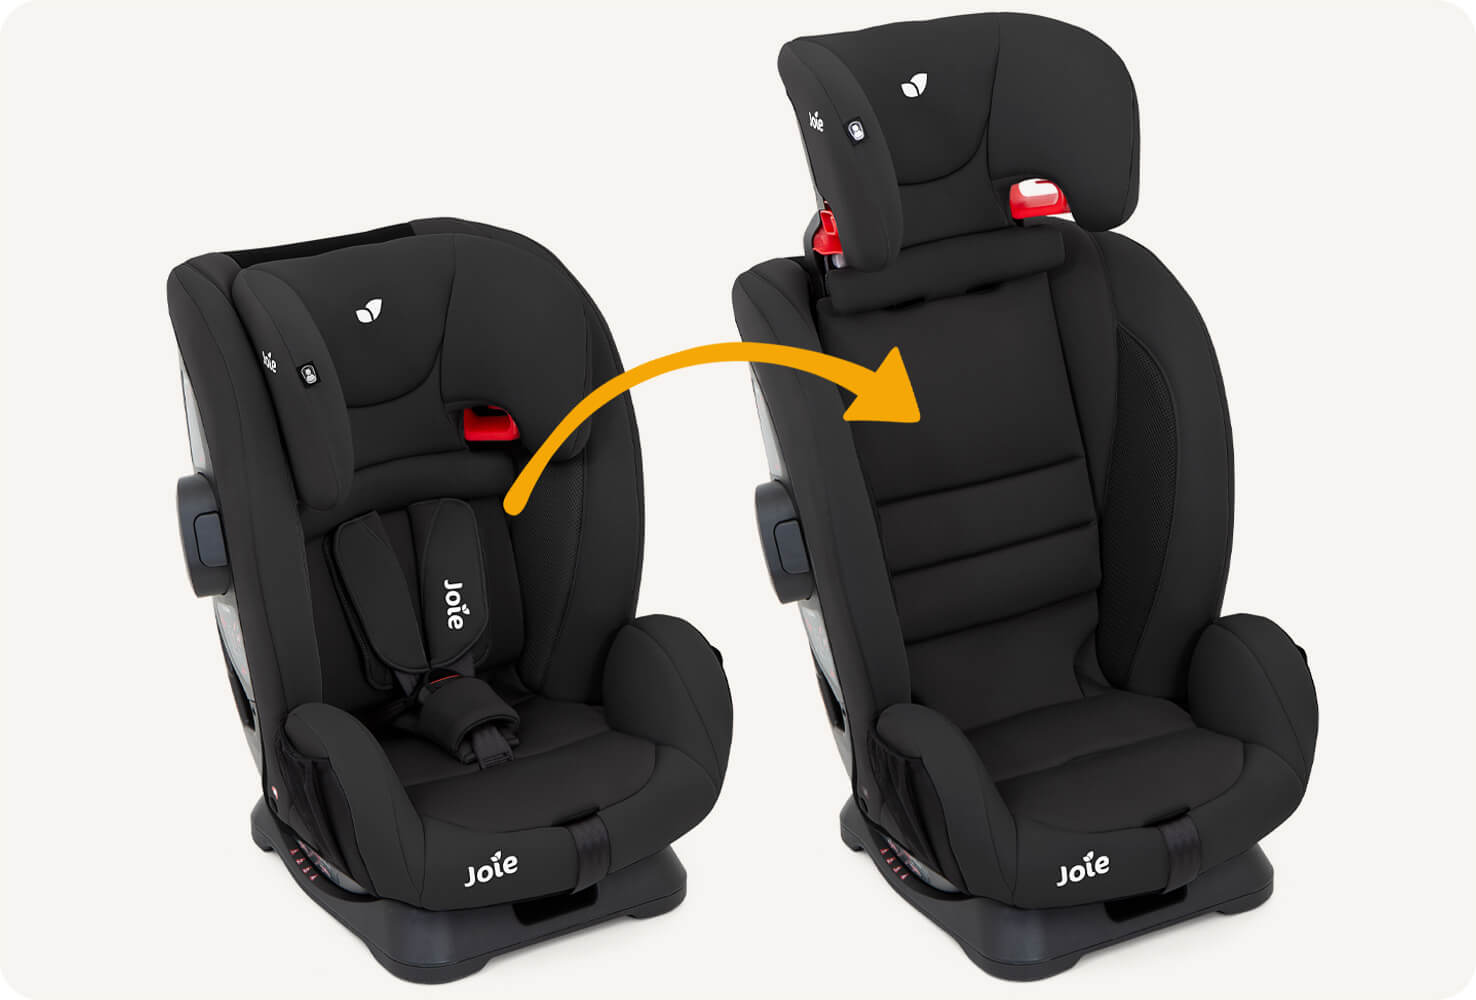 Right angle view of fortifi R child car seat with an inset picture showing the harness storage behind the seat’s cover.